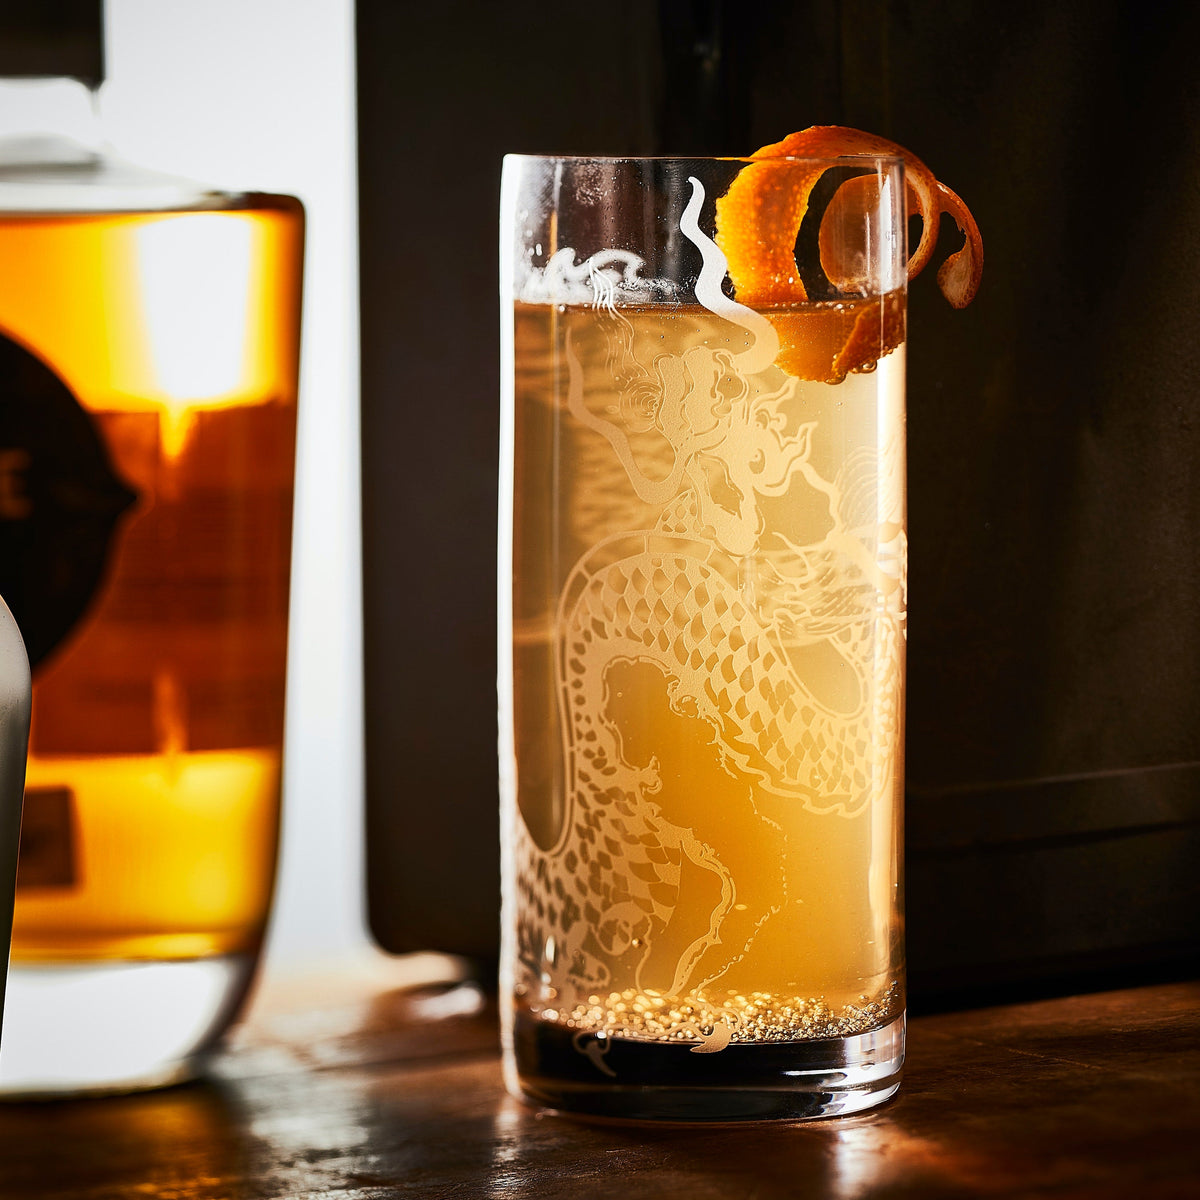 A thirst quenching cocktail topped with orange peel is featured in a sand etched highball glass by dragon design by Caskata.